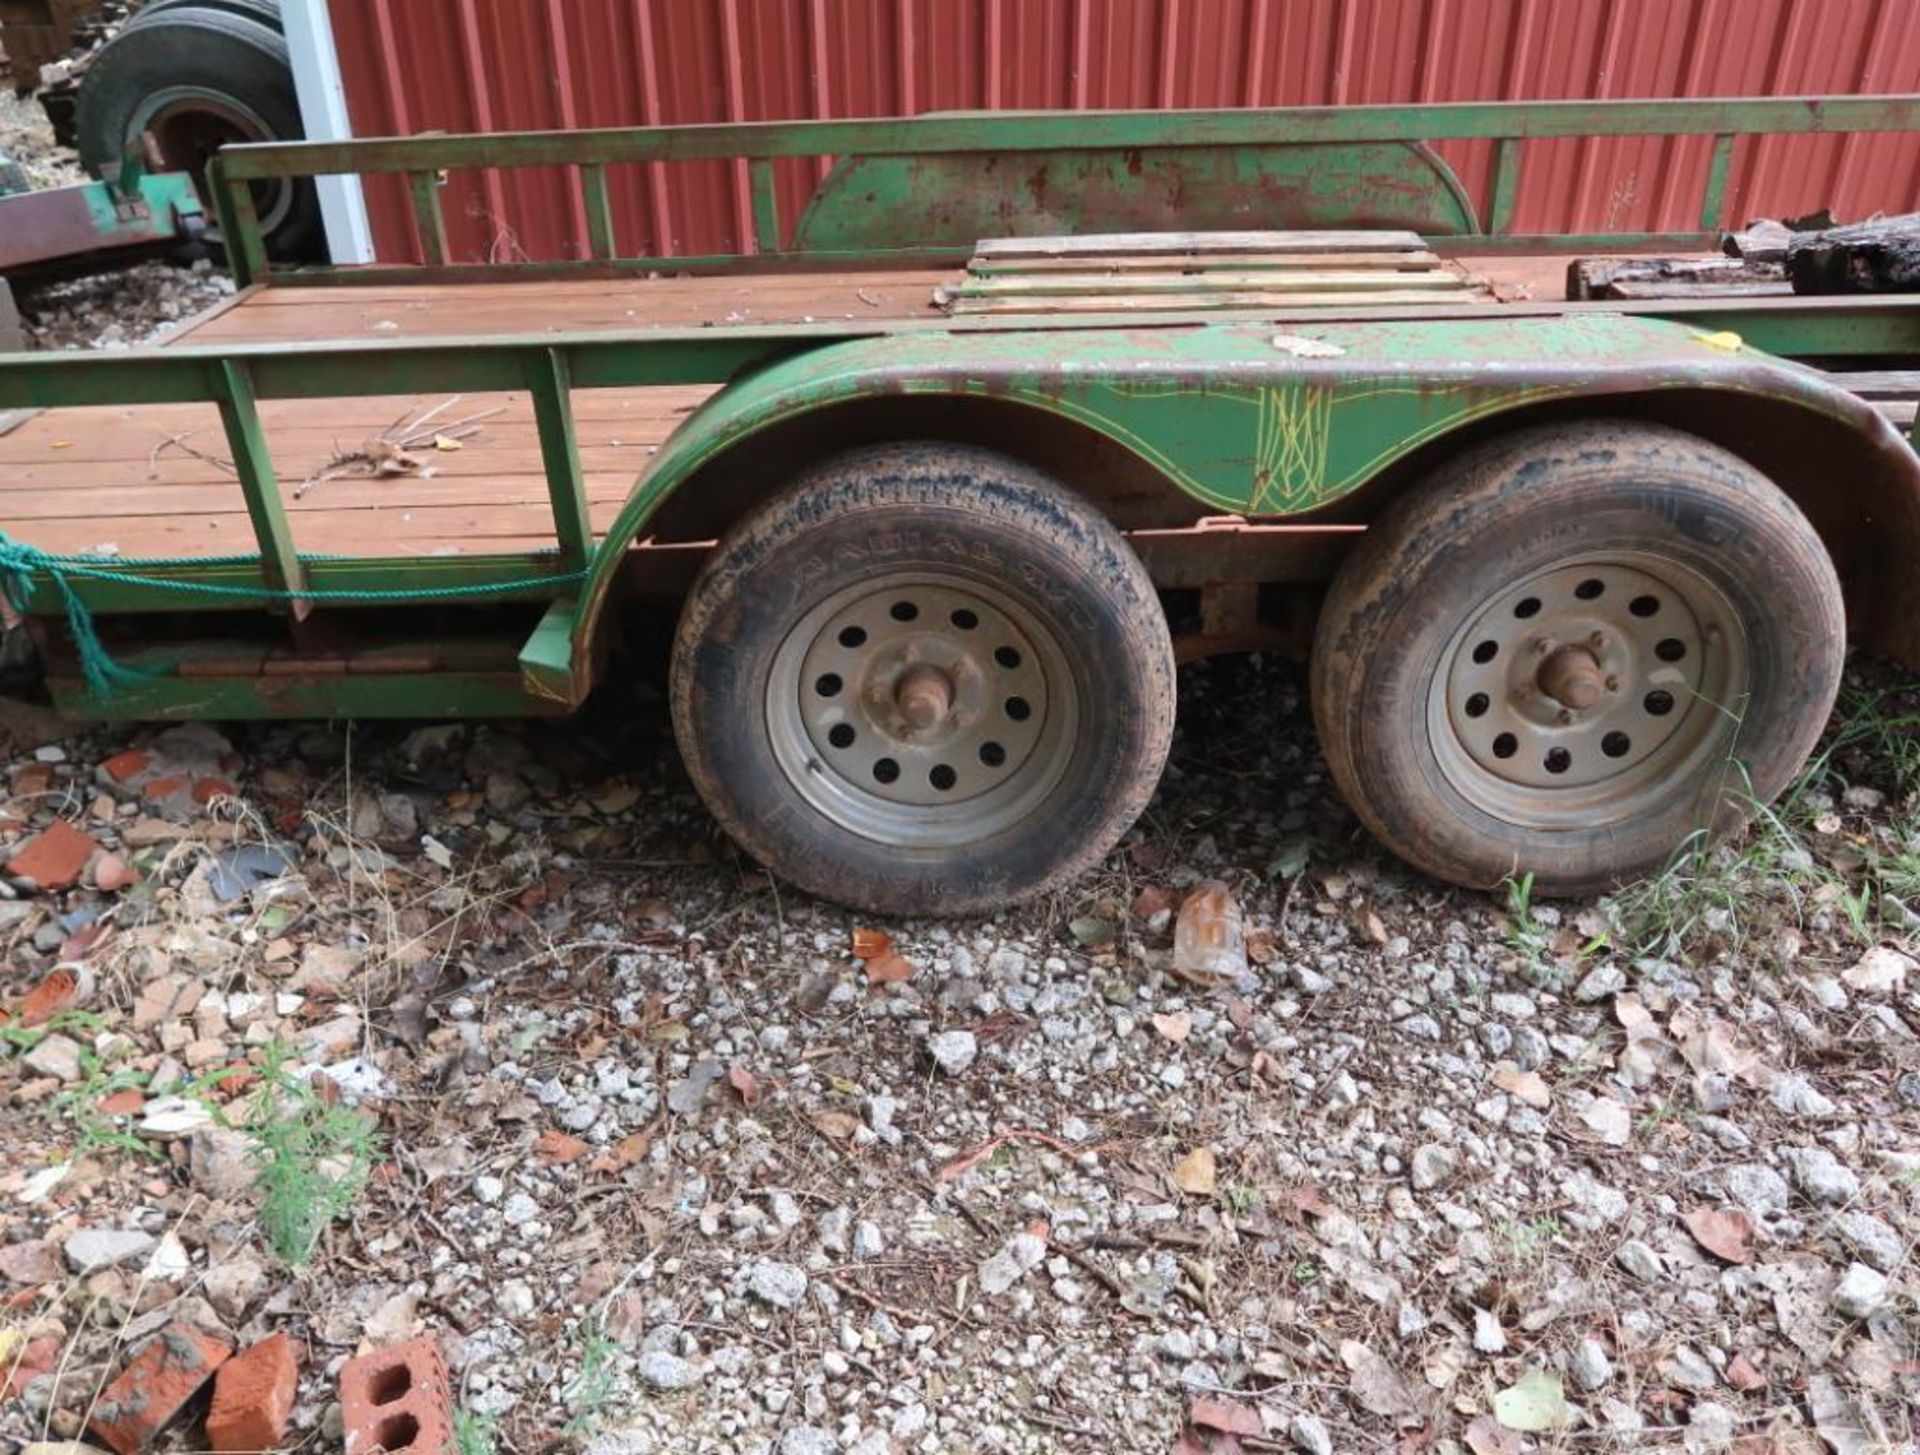 18 ft. Tandem-Axle Utility Trailer, VIN 1MAU18248W035730 - Image 6 of 8